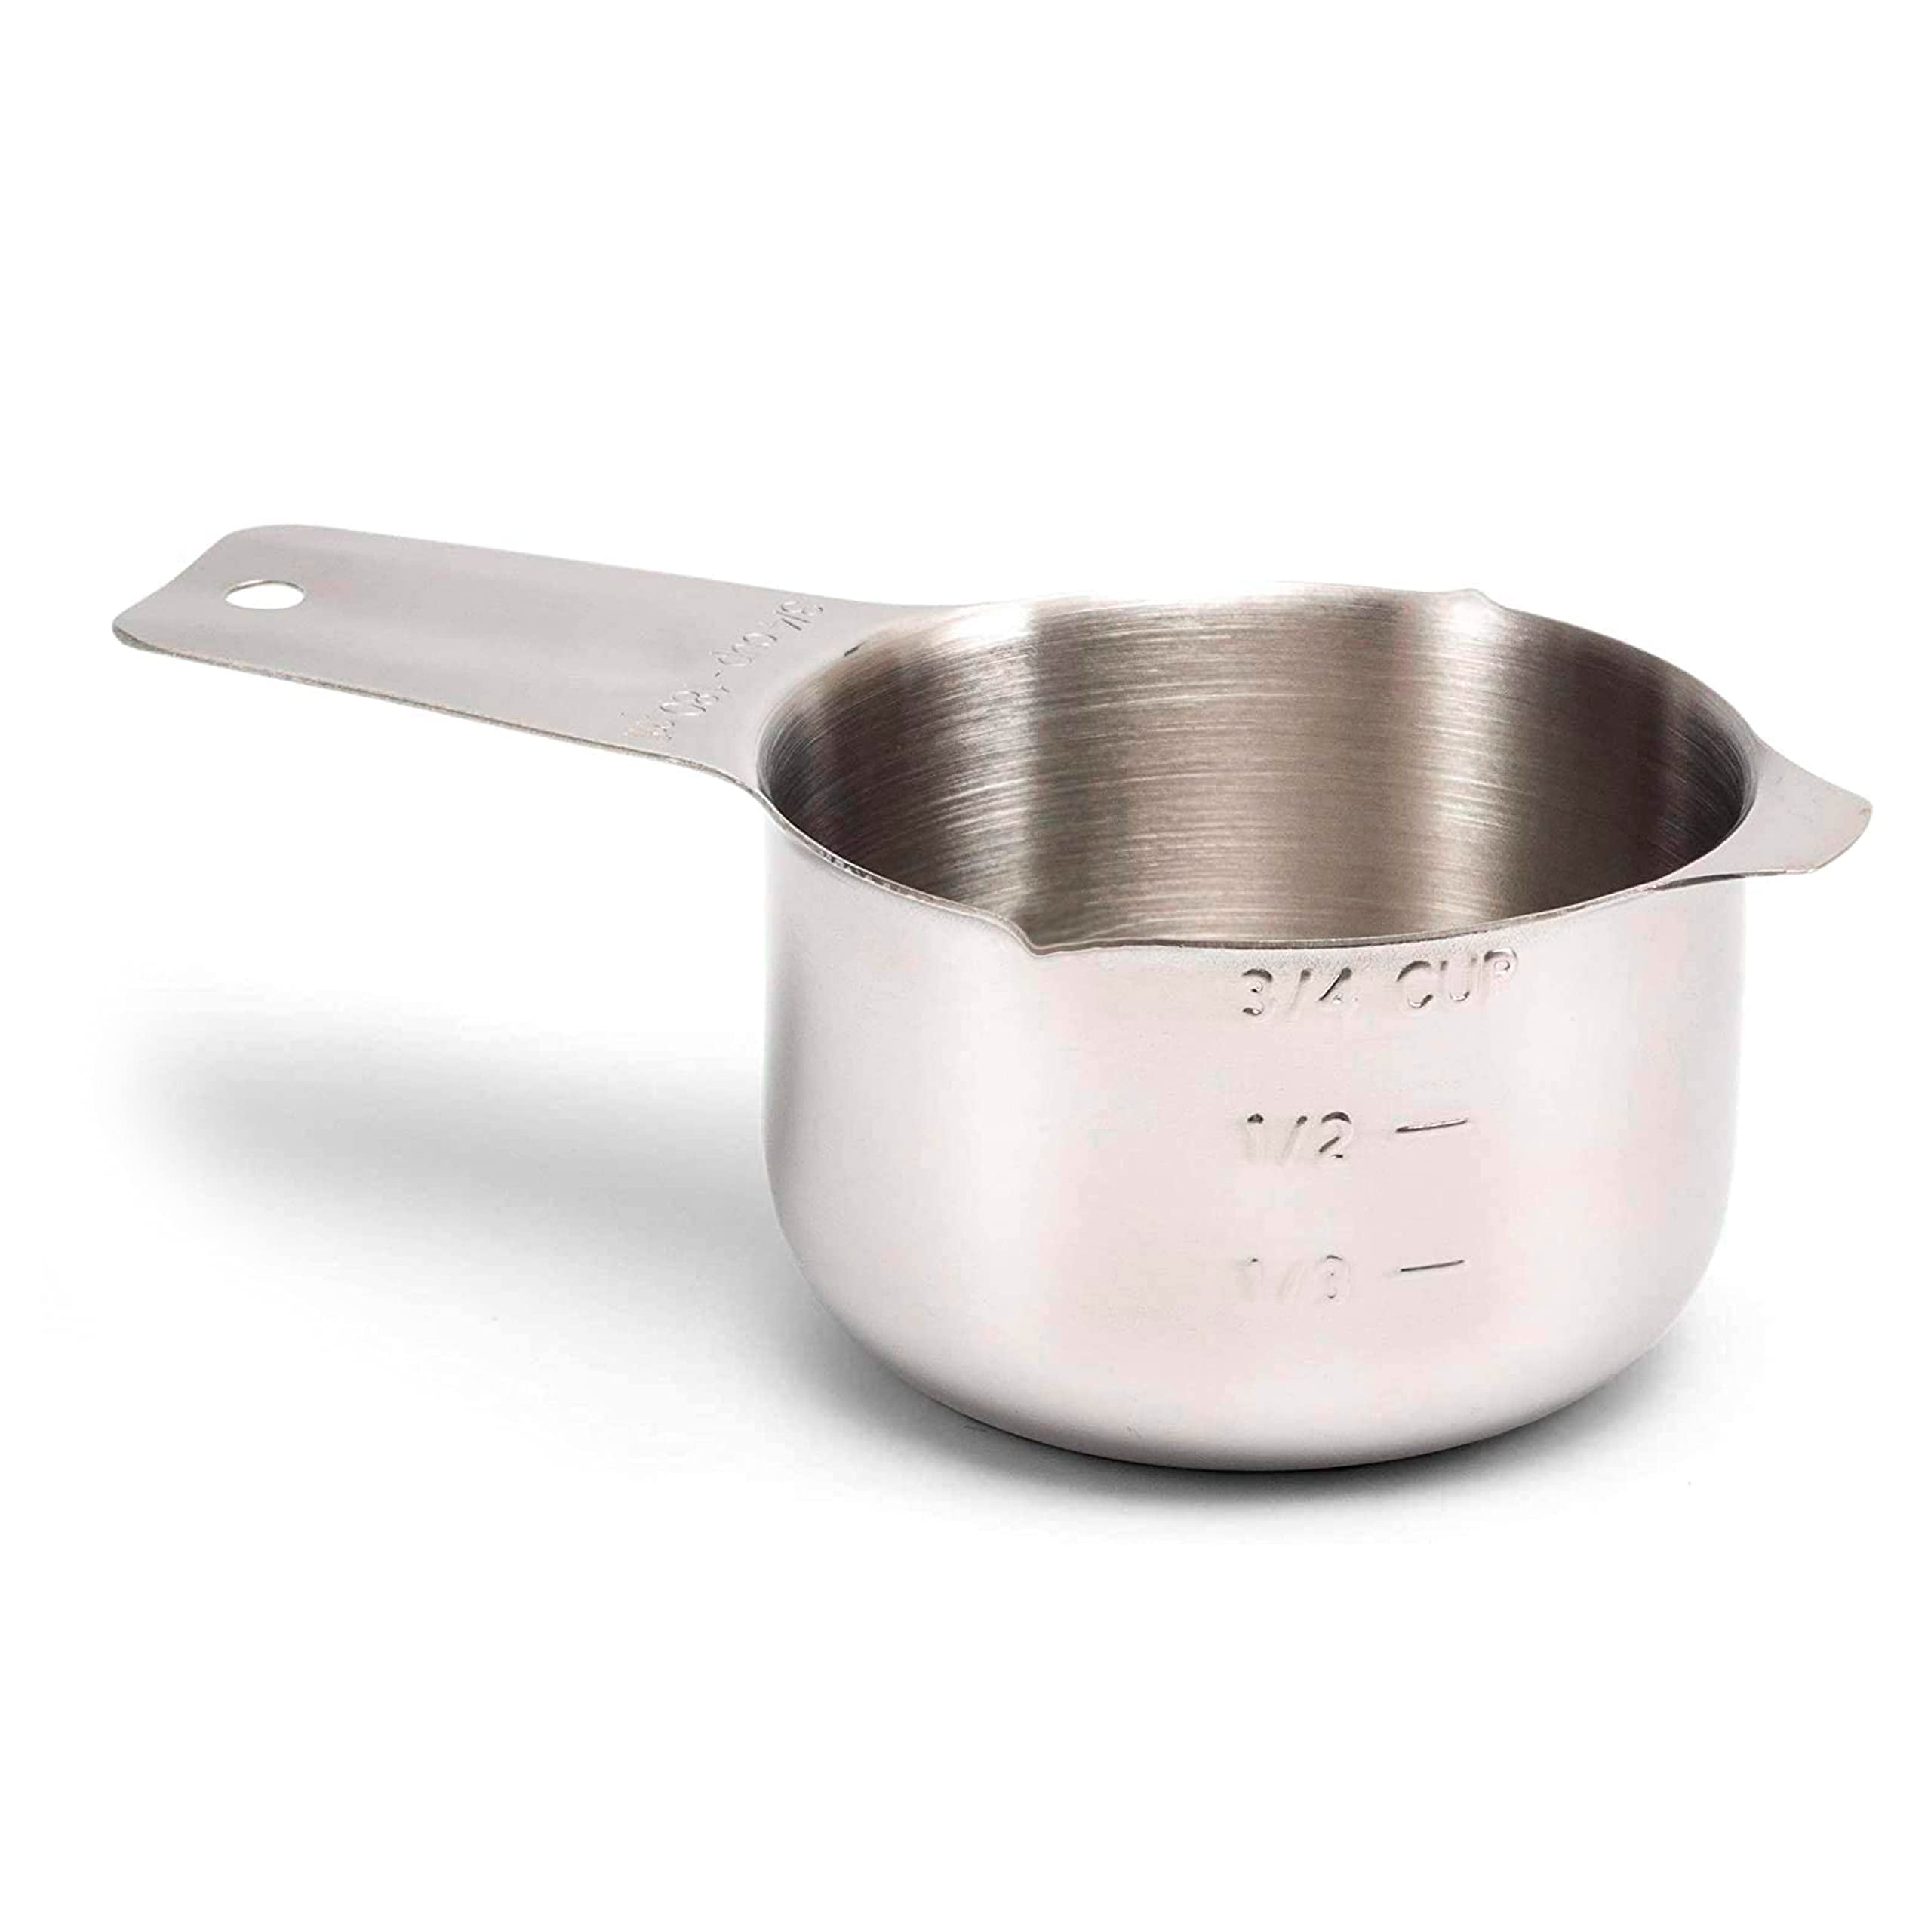 Stainless Steel Measuring Cups - The Clever Carrot